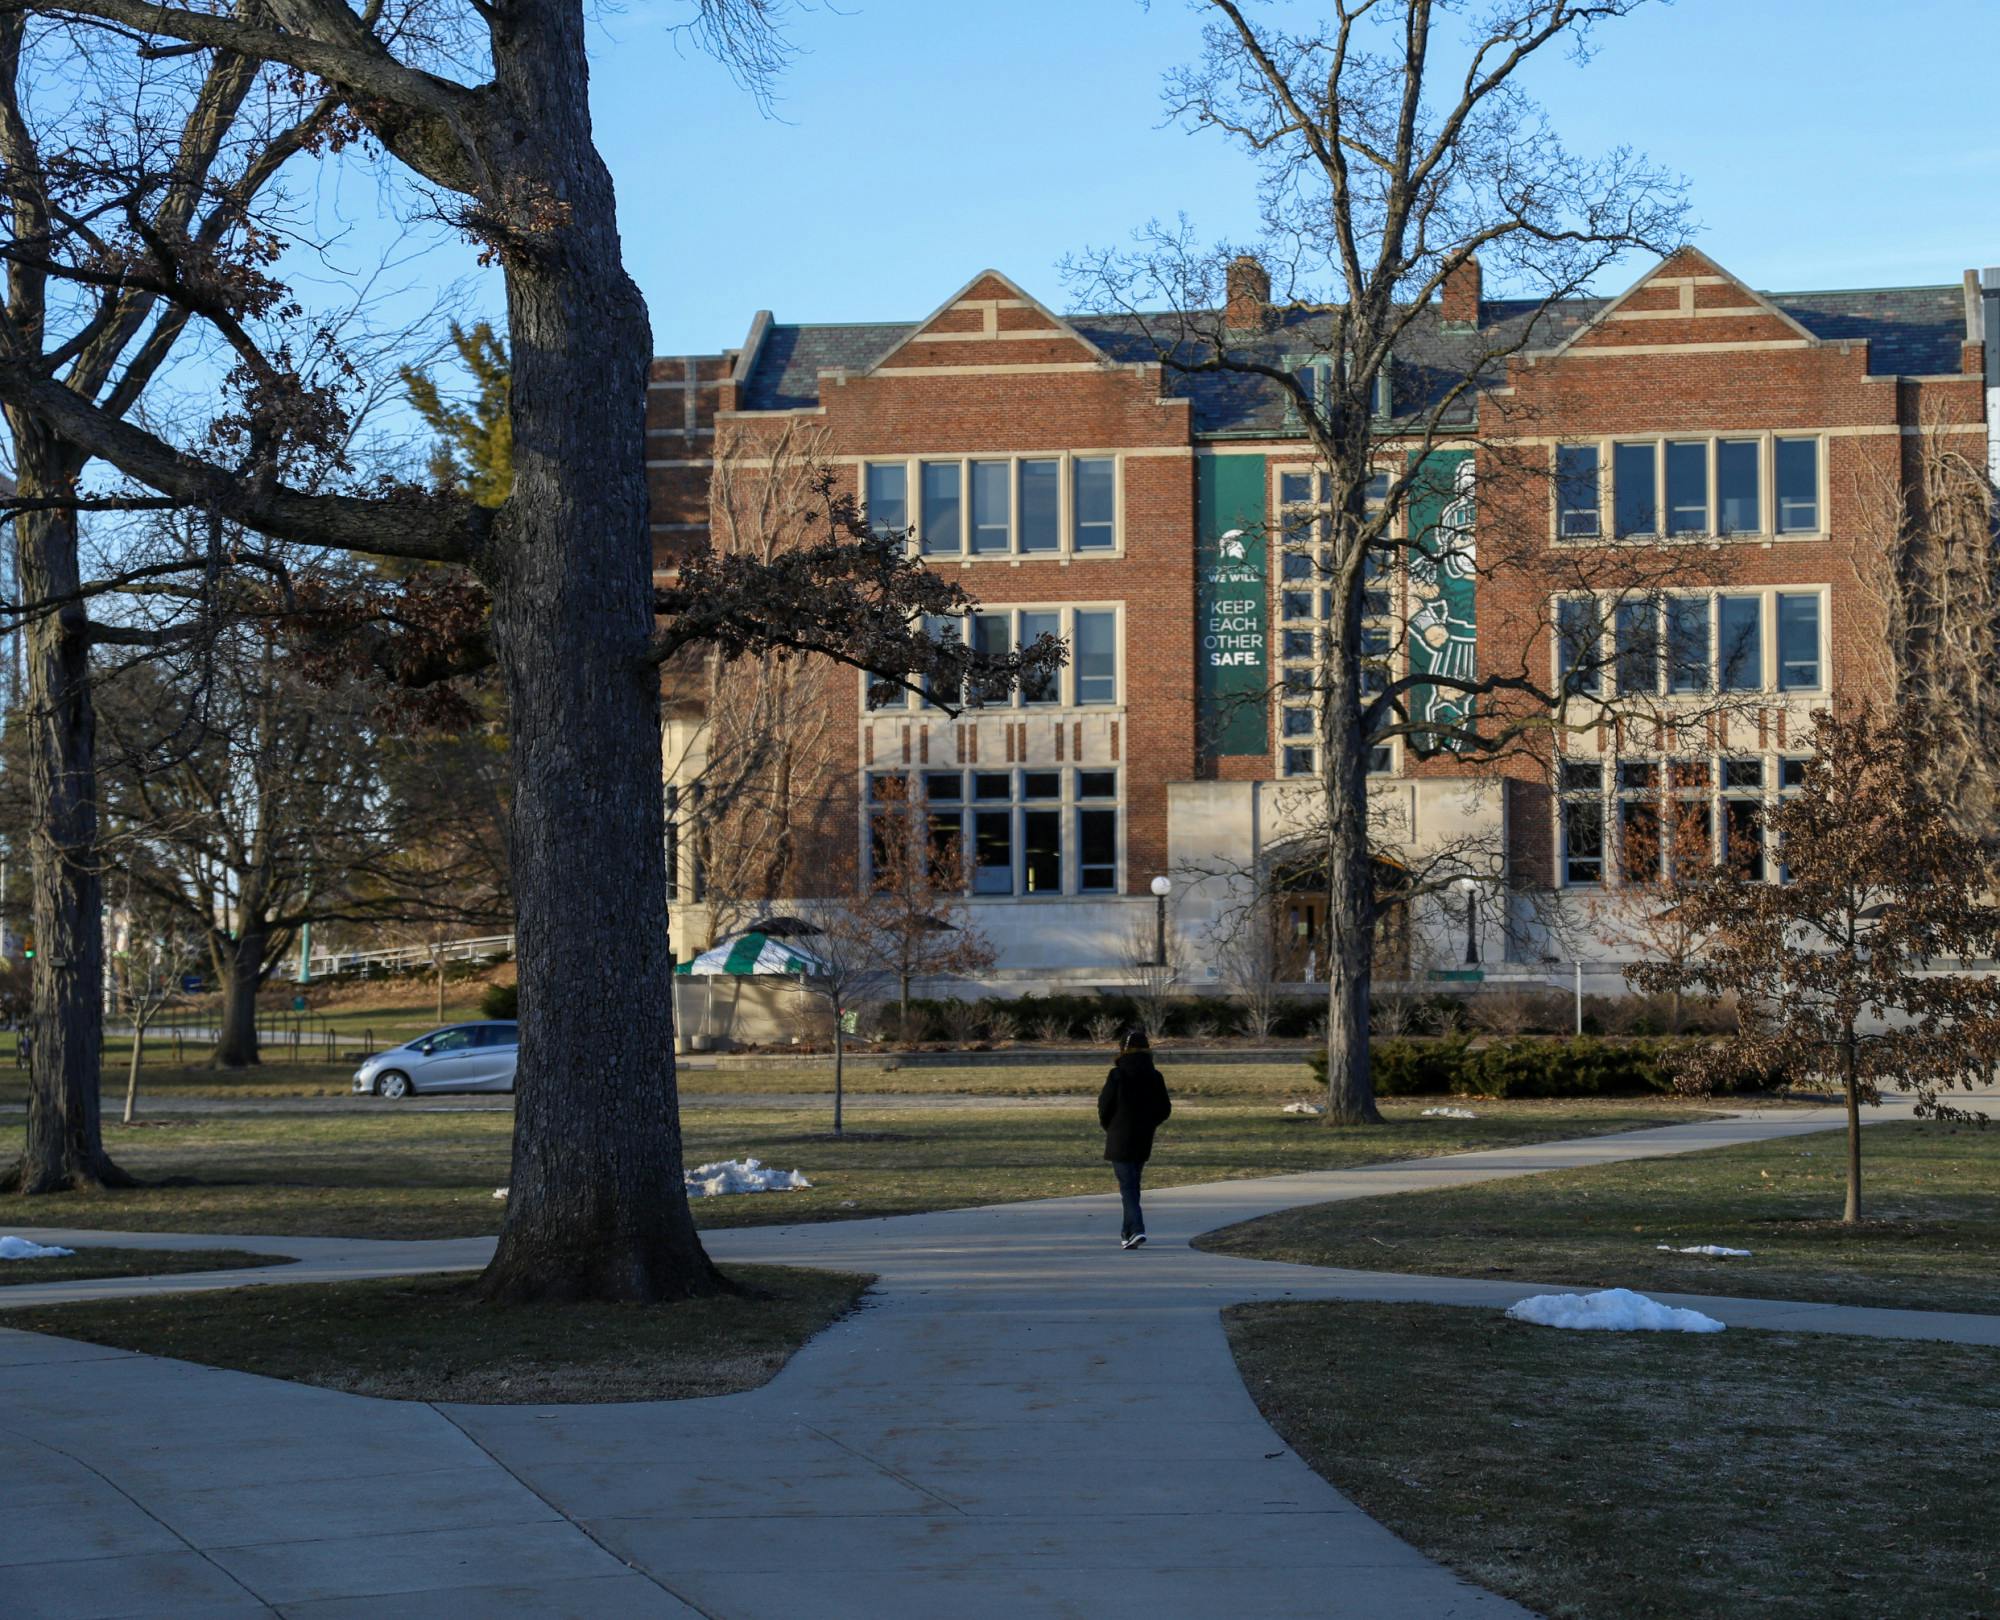 <p>The MSU Union has a large sign that says, &quot;Keep Each Other Safe,&quot; and below the sign is a person walking on campus on March 7, 2021. </p>